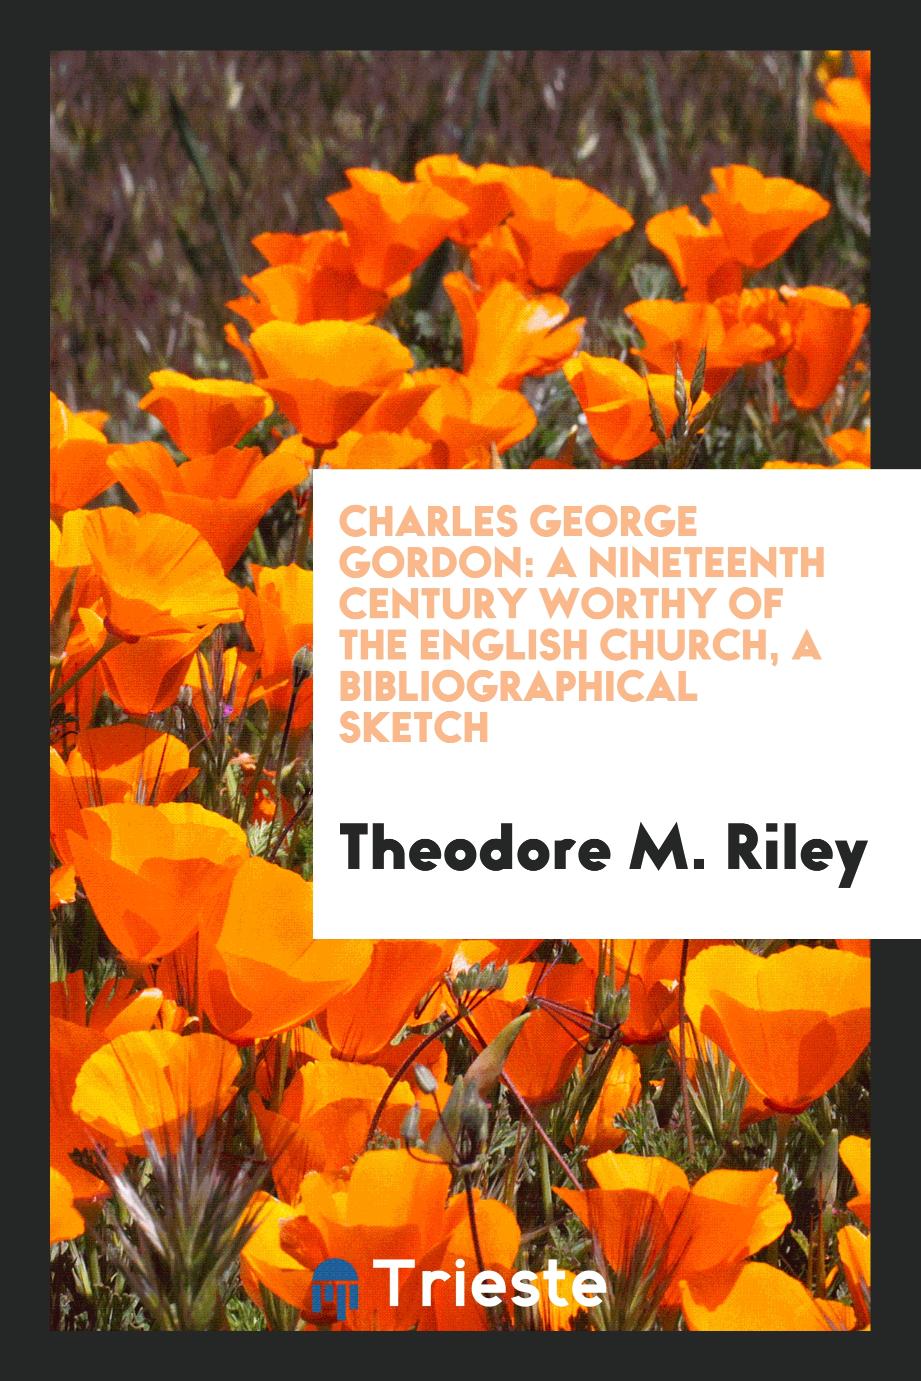 Charles George Gordon: A Nineteenth Century Worthy of the English Church, a Bibliographical Sketch